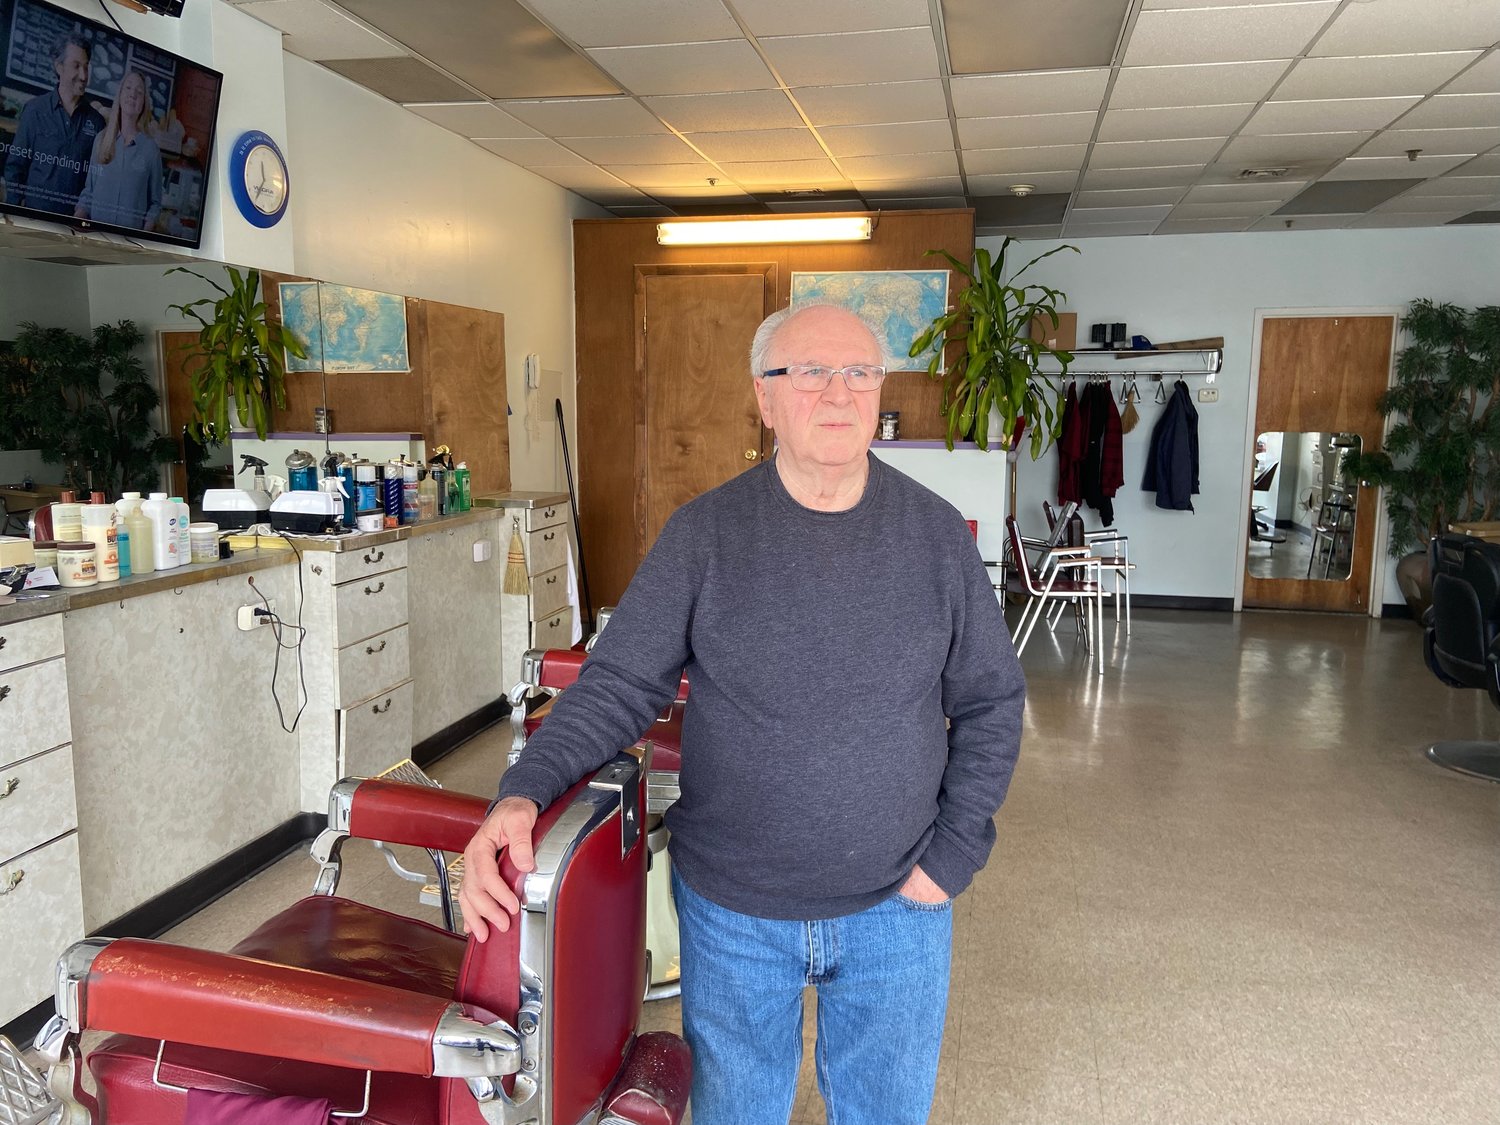 Nick Oricchio, who’s originally from Salerno, Italy, has cut hair in Long Beach for 60 years.